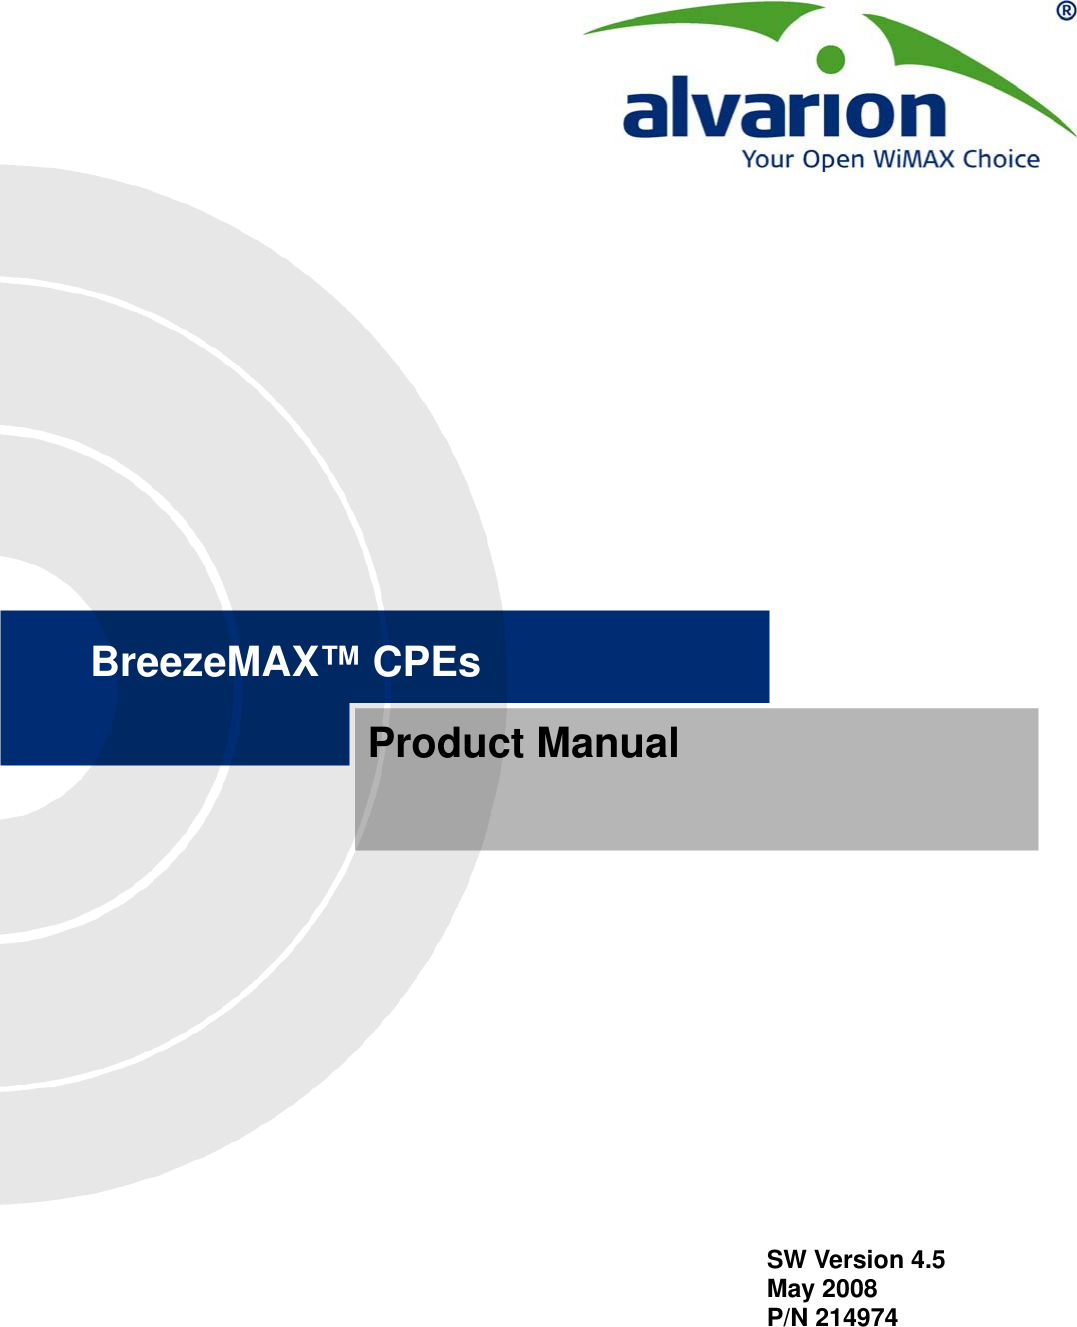 BreezeMAX™ CPEsProduct ManualSW Version 4.5May 2008P/N 214974